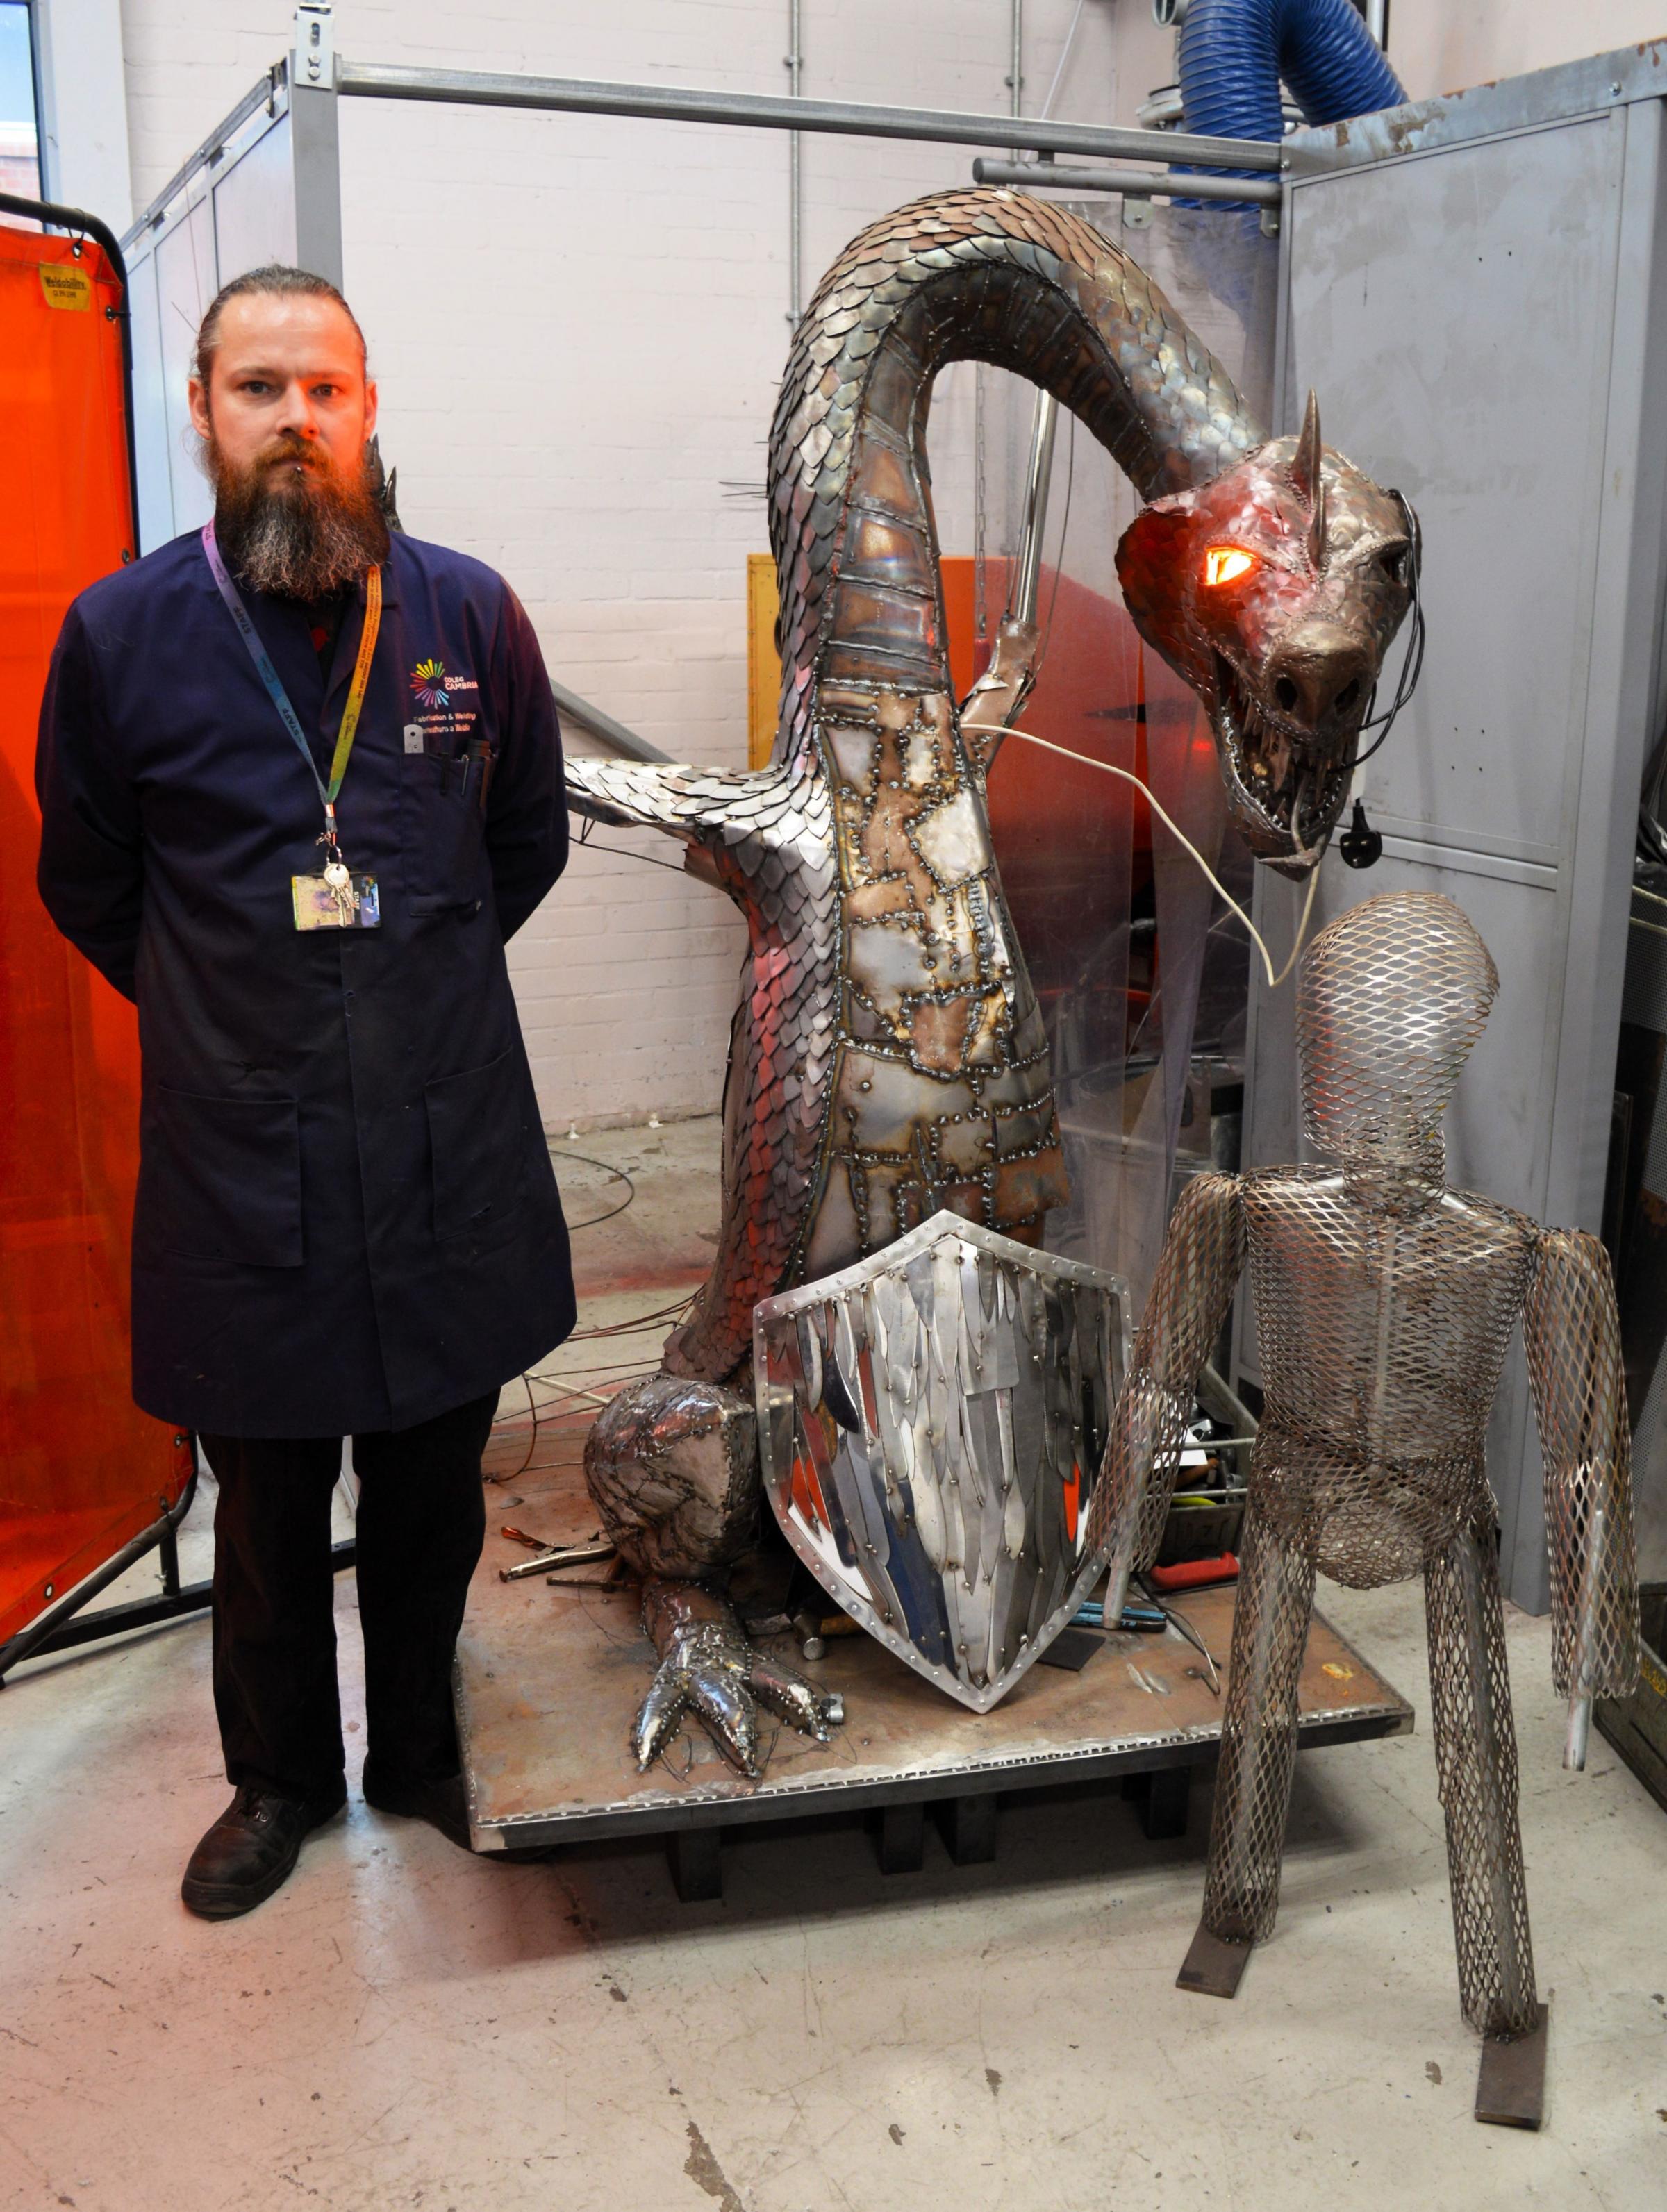 Lecturer John Freeman pictured with the Knife Dragon.